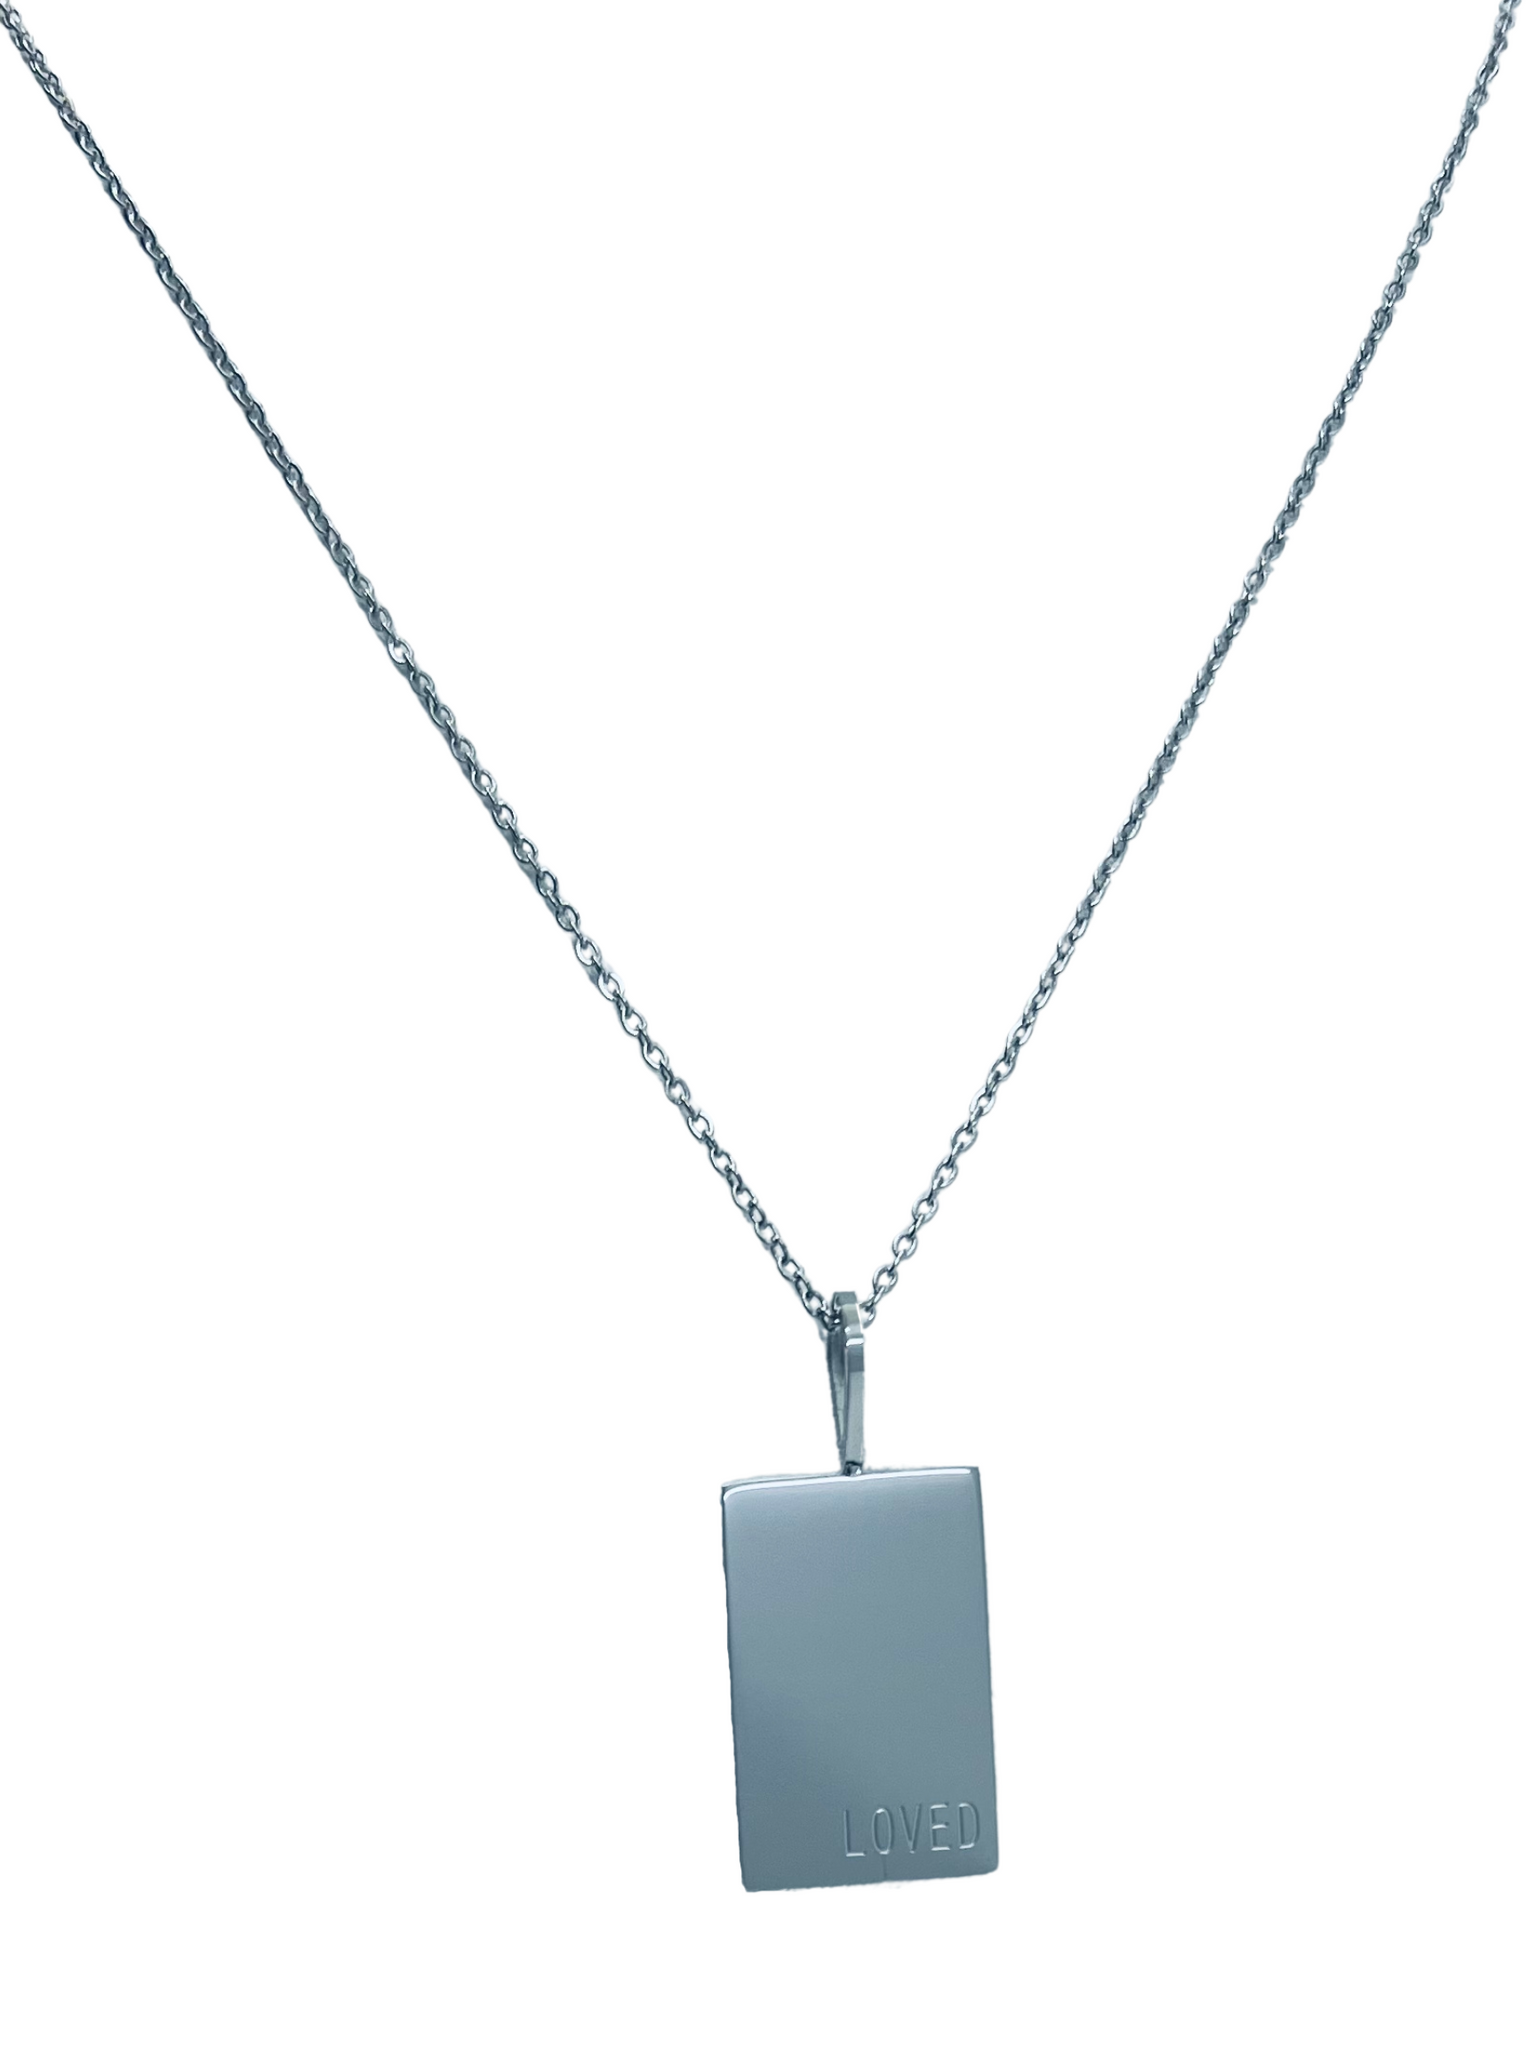 The Loved Tag Silver Necklace